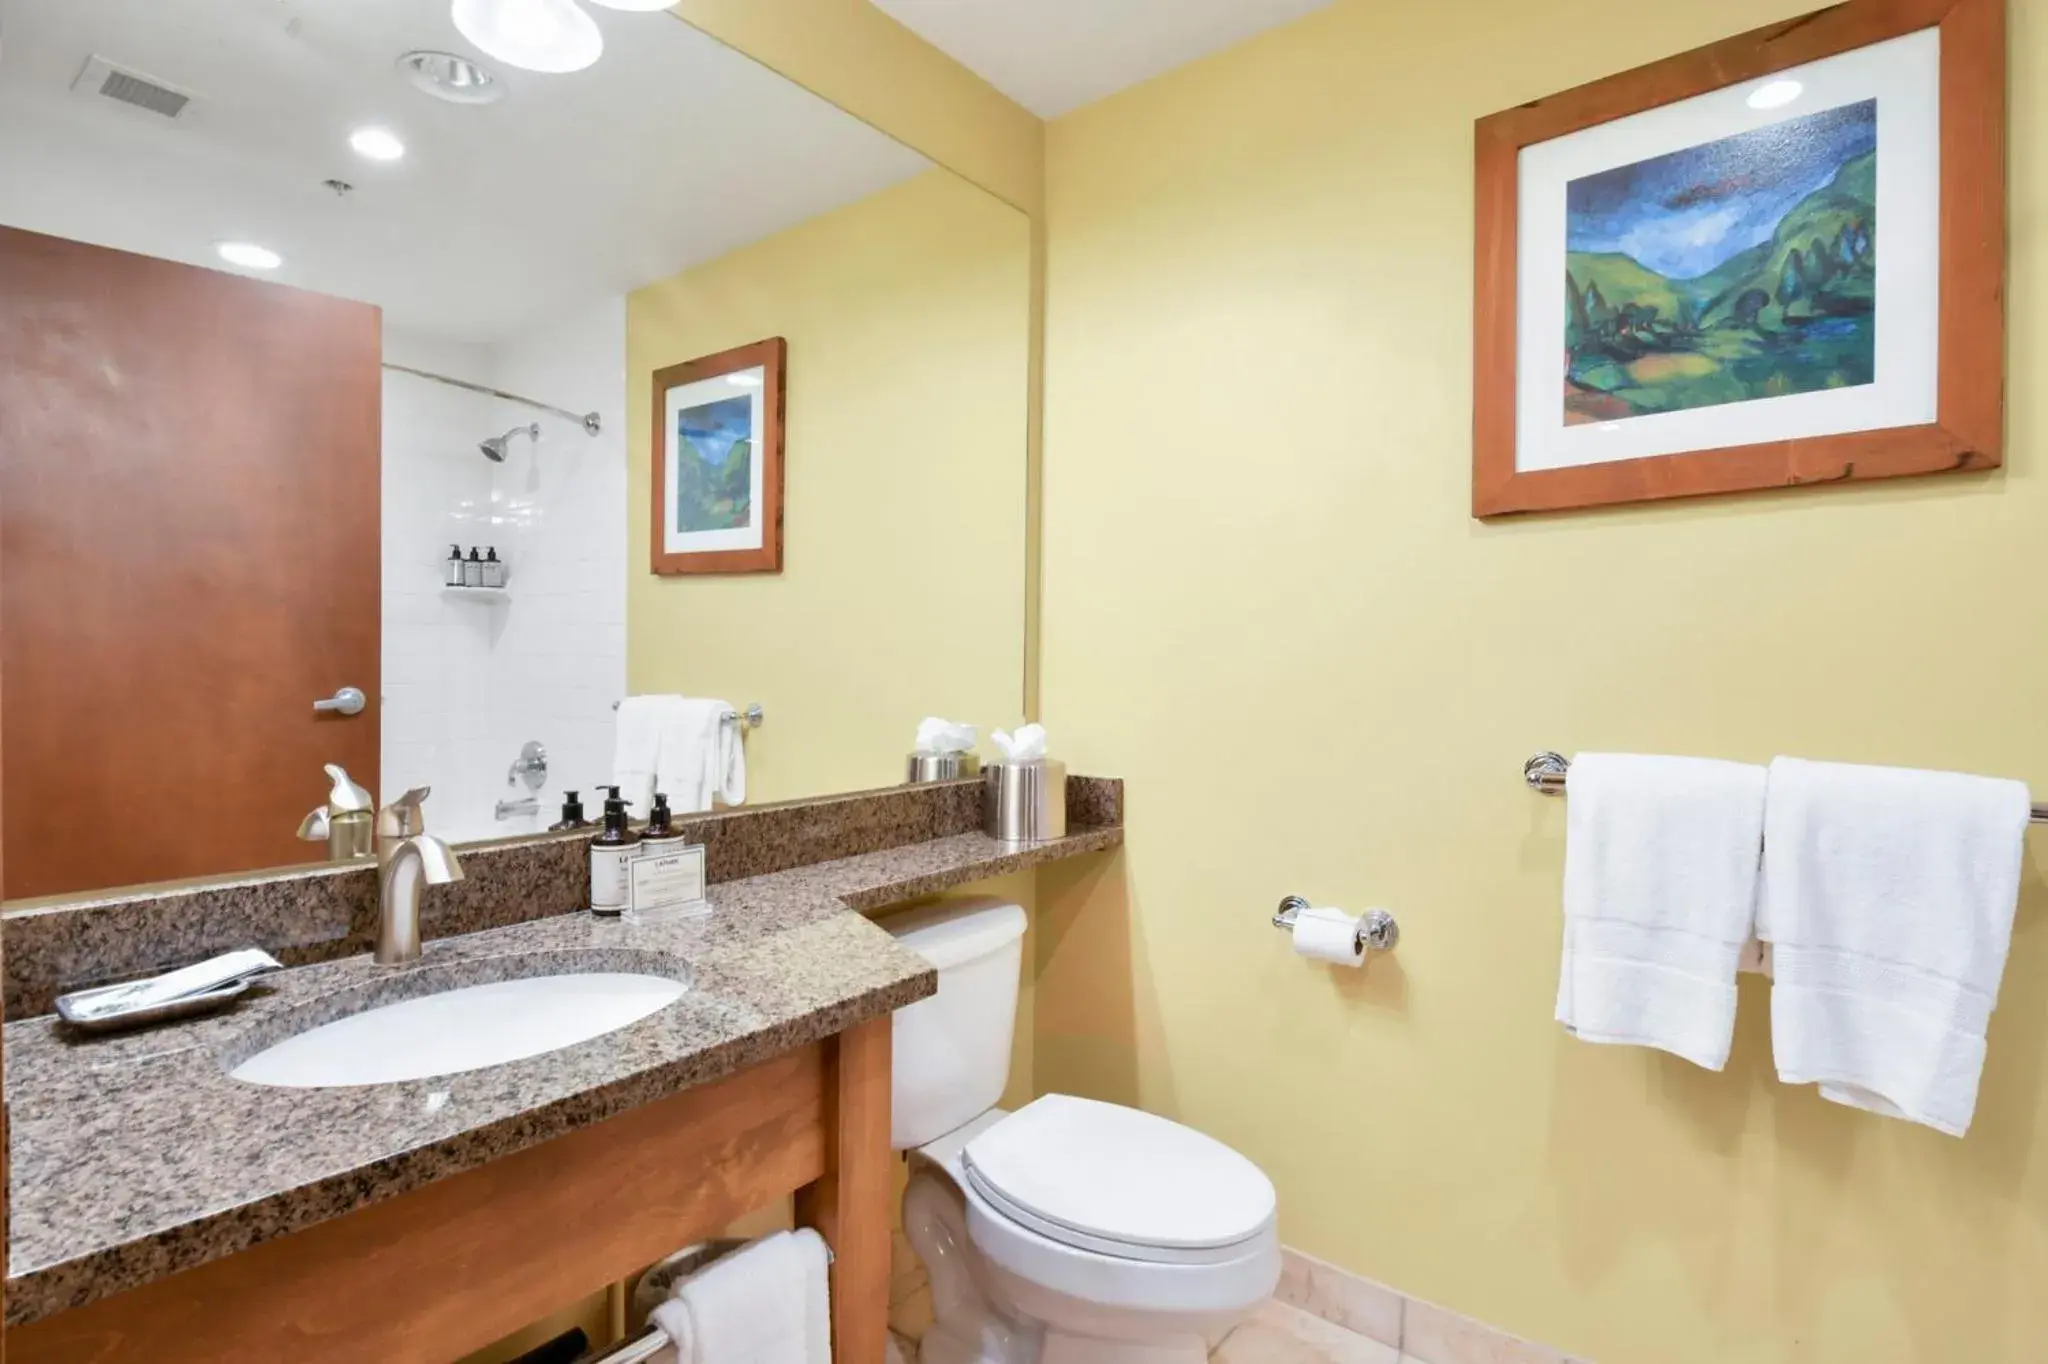 Bathroom in Sundial Lodge Park City - Canyons Village